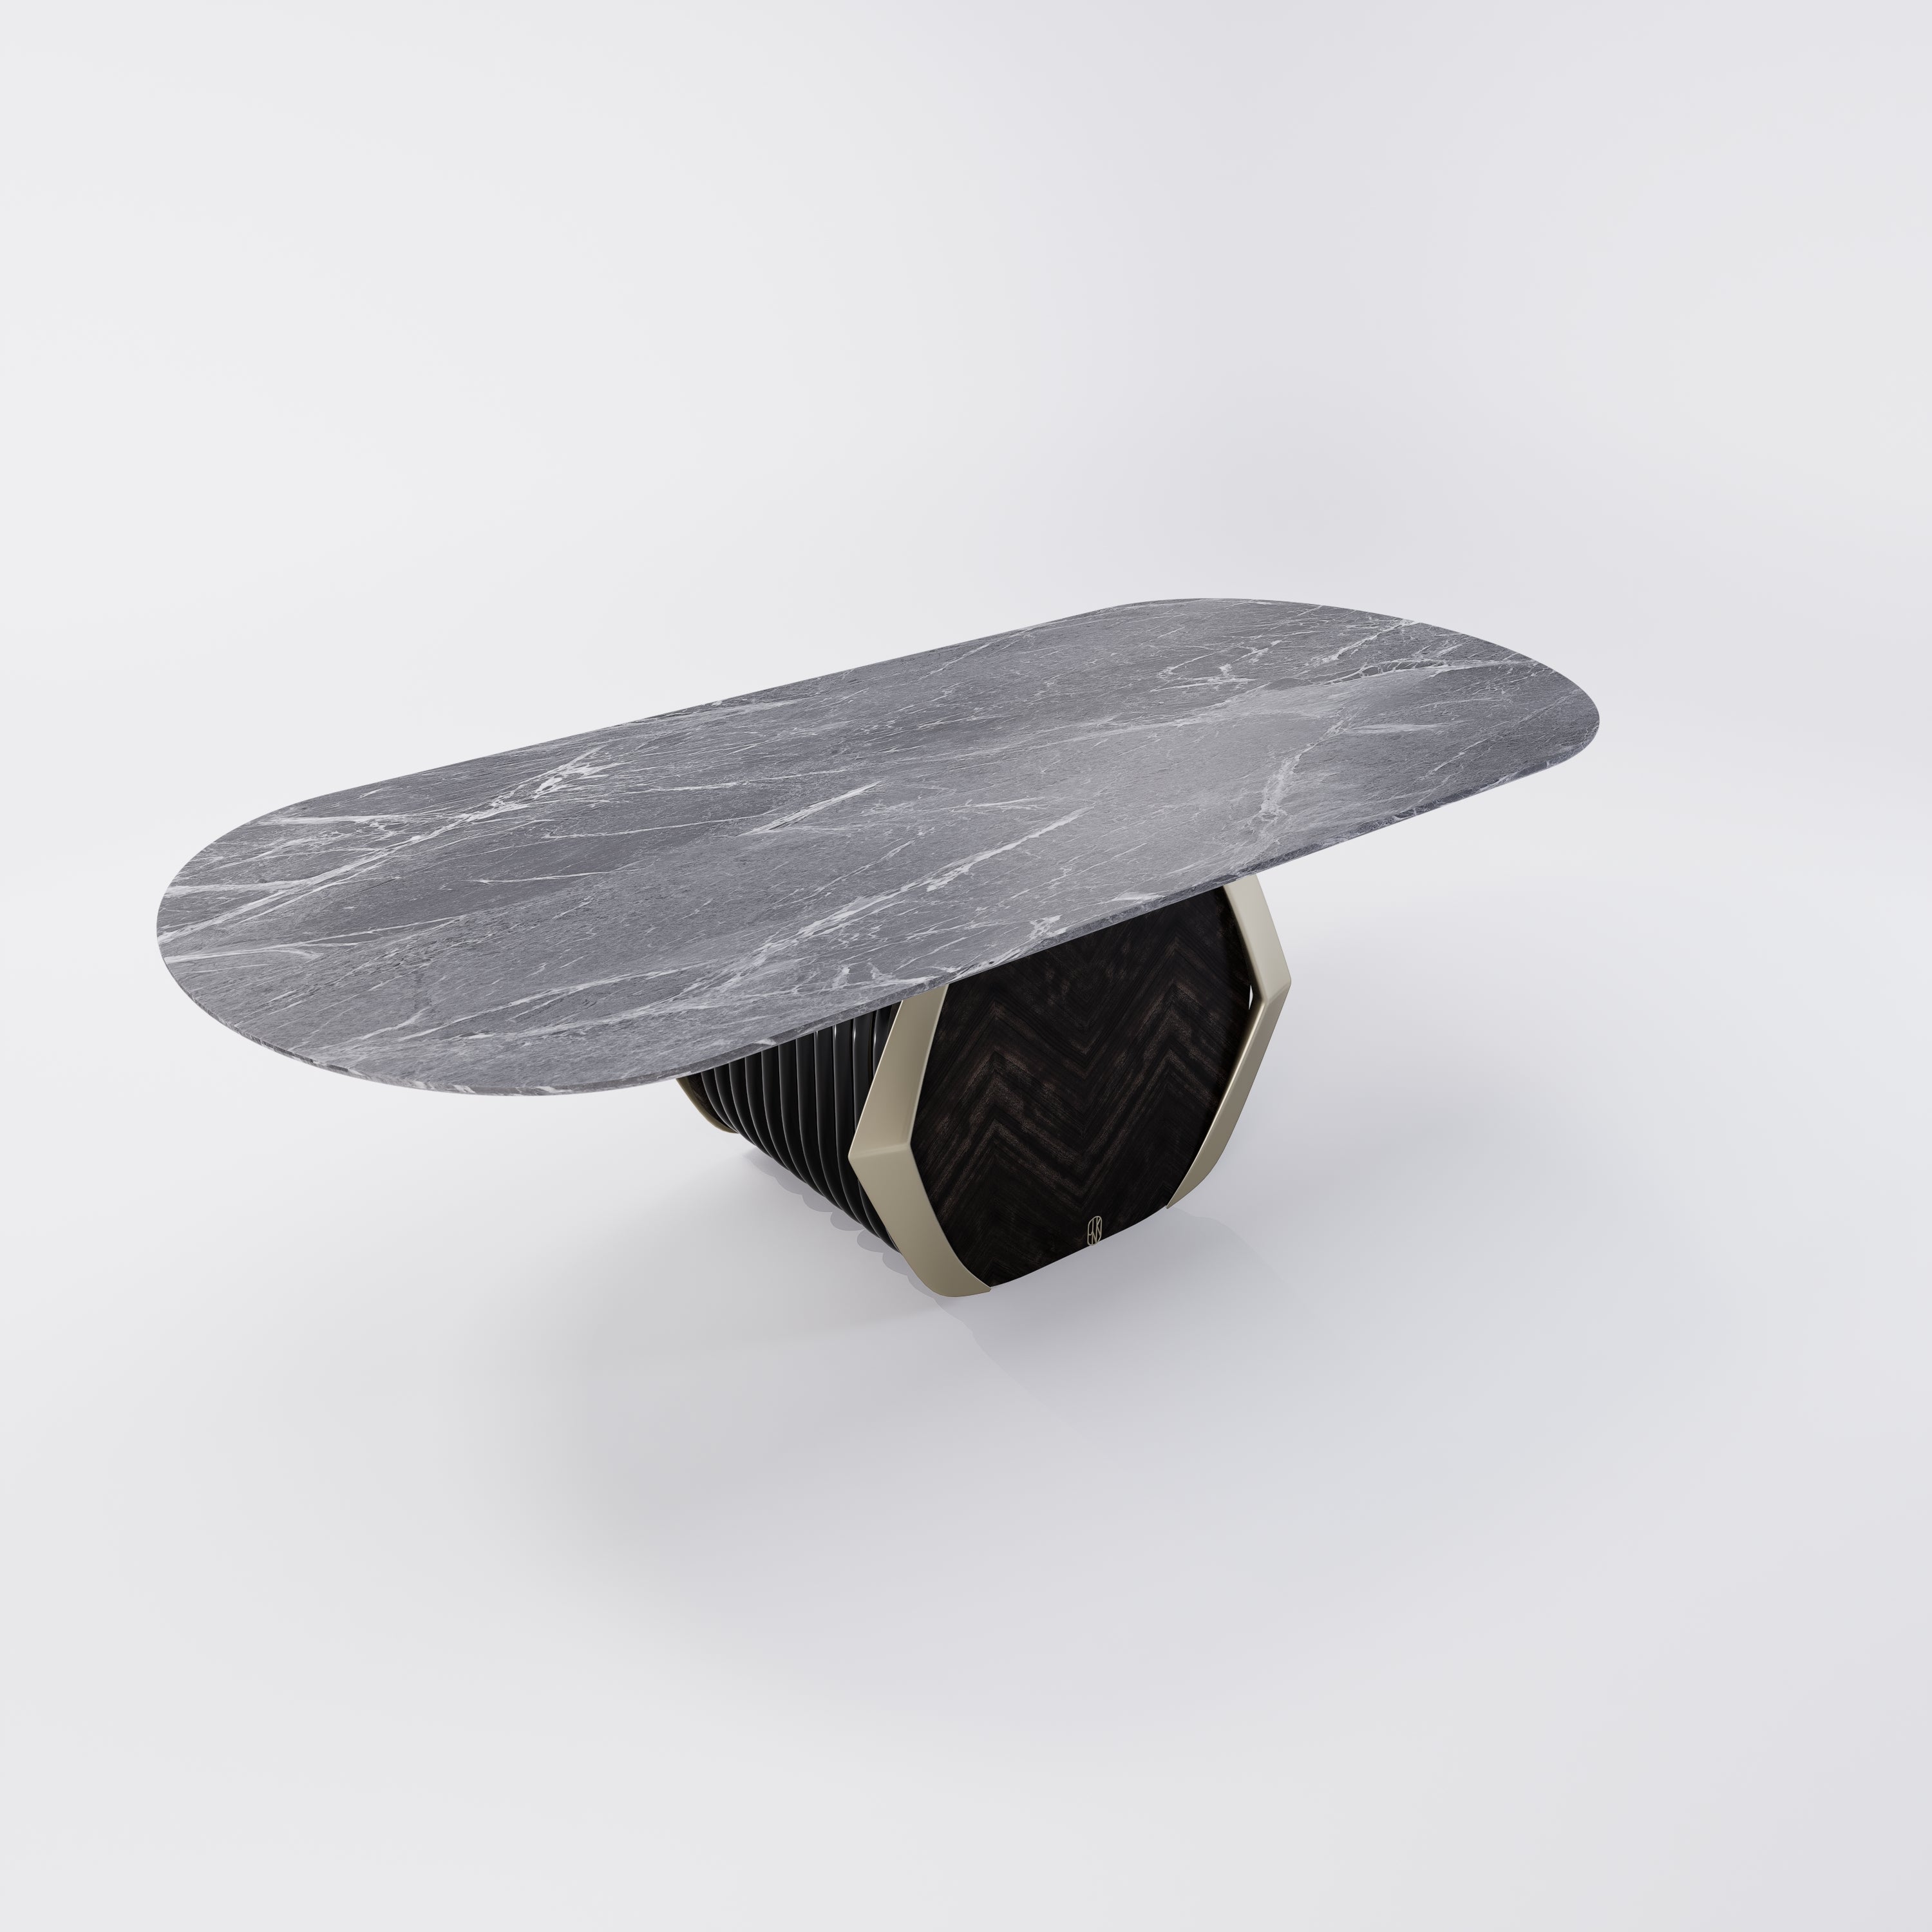 Veron Dining Table